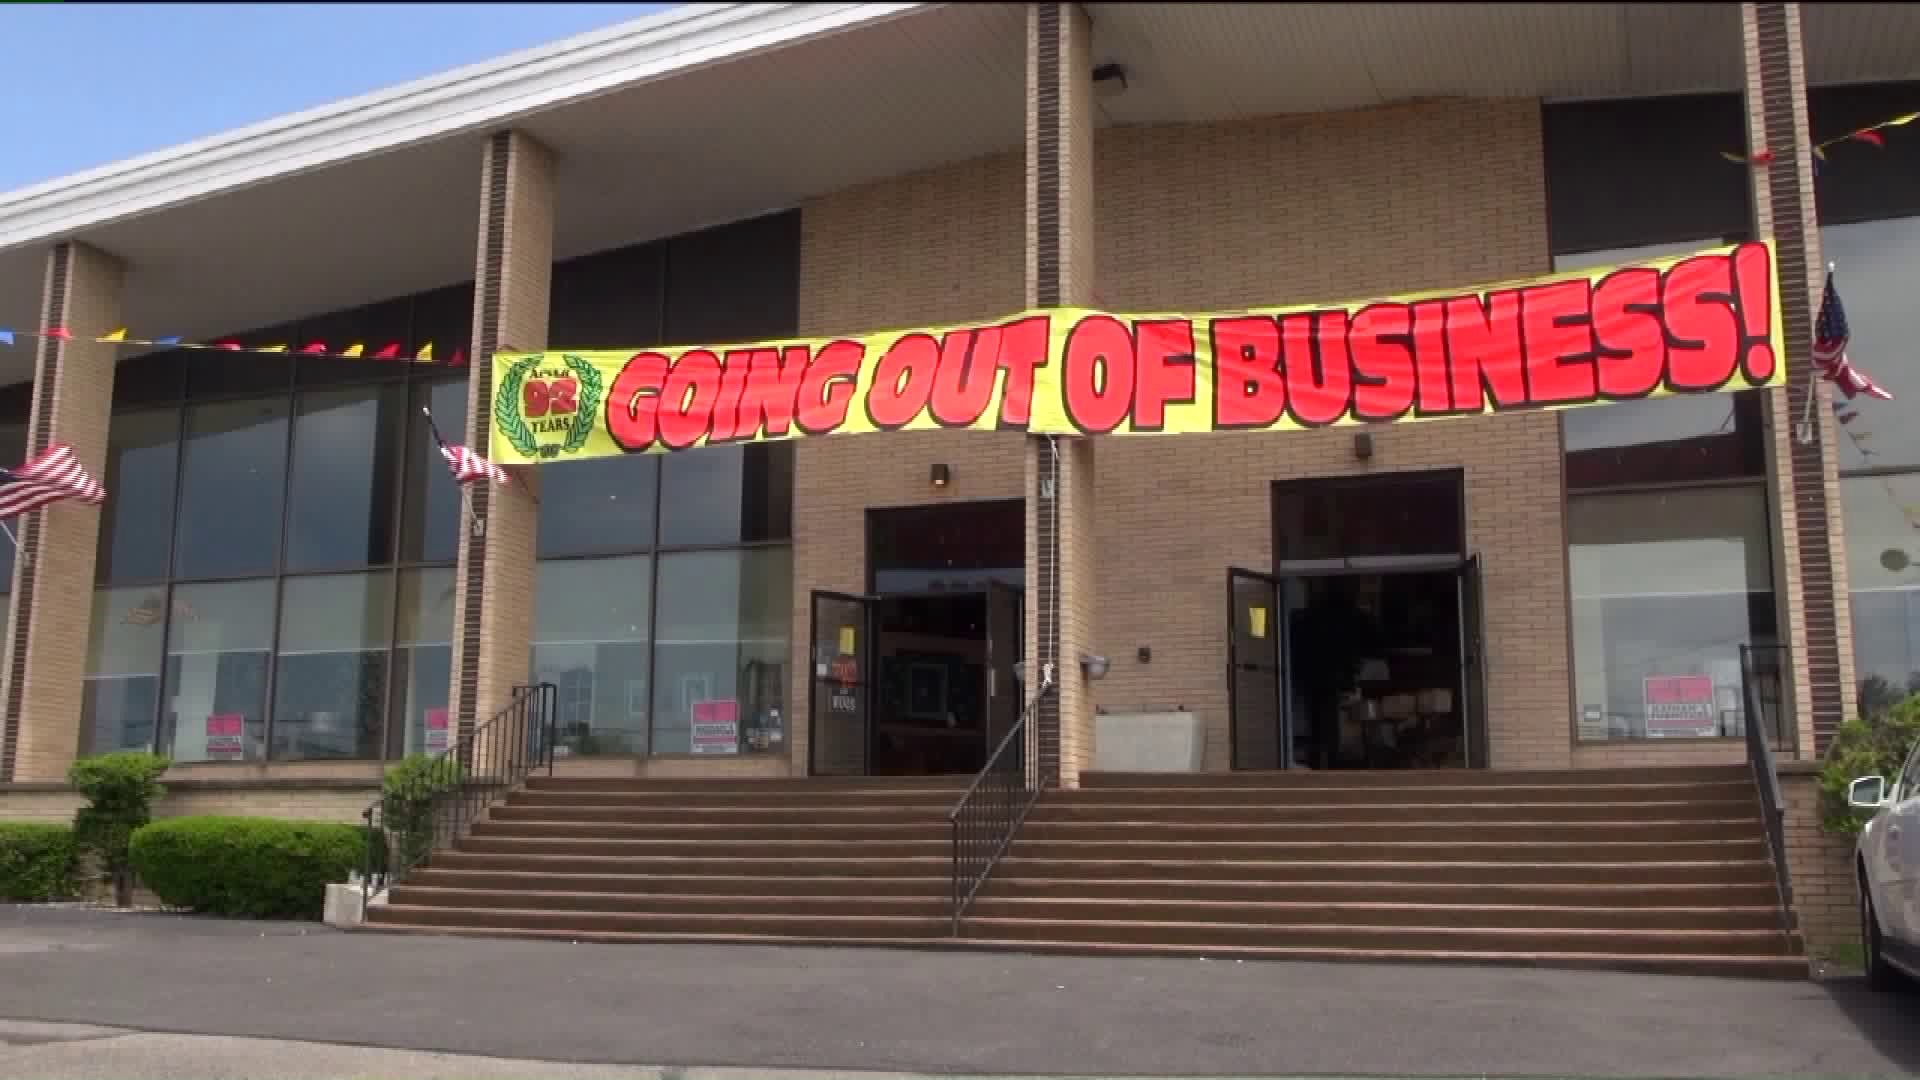 92-year-old furniture store going out of business